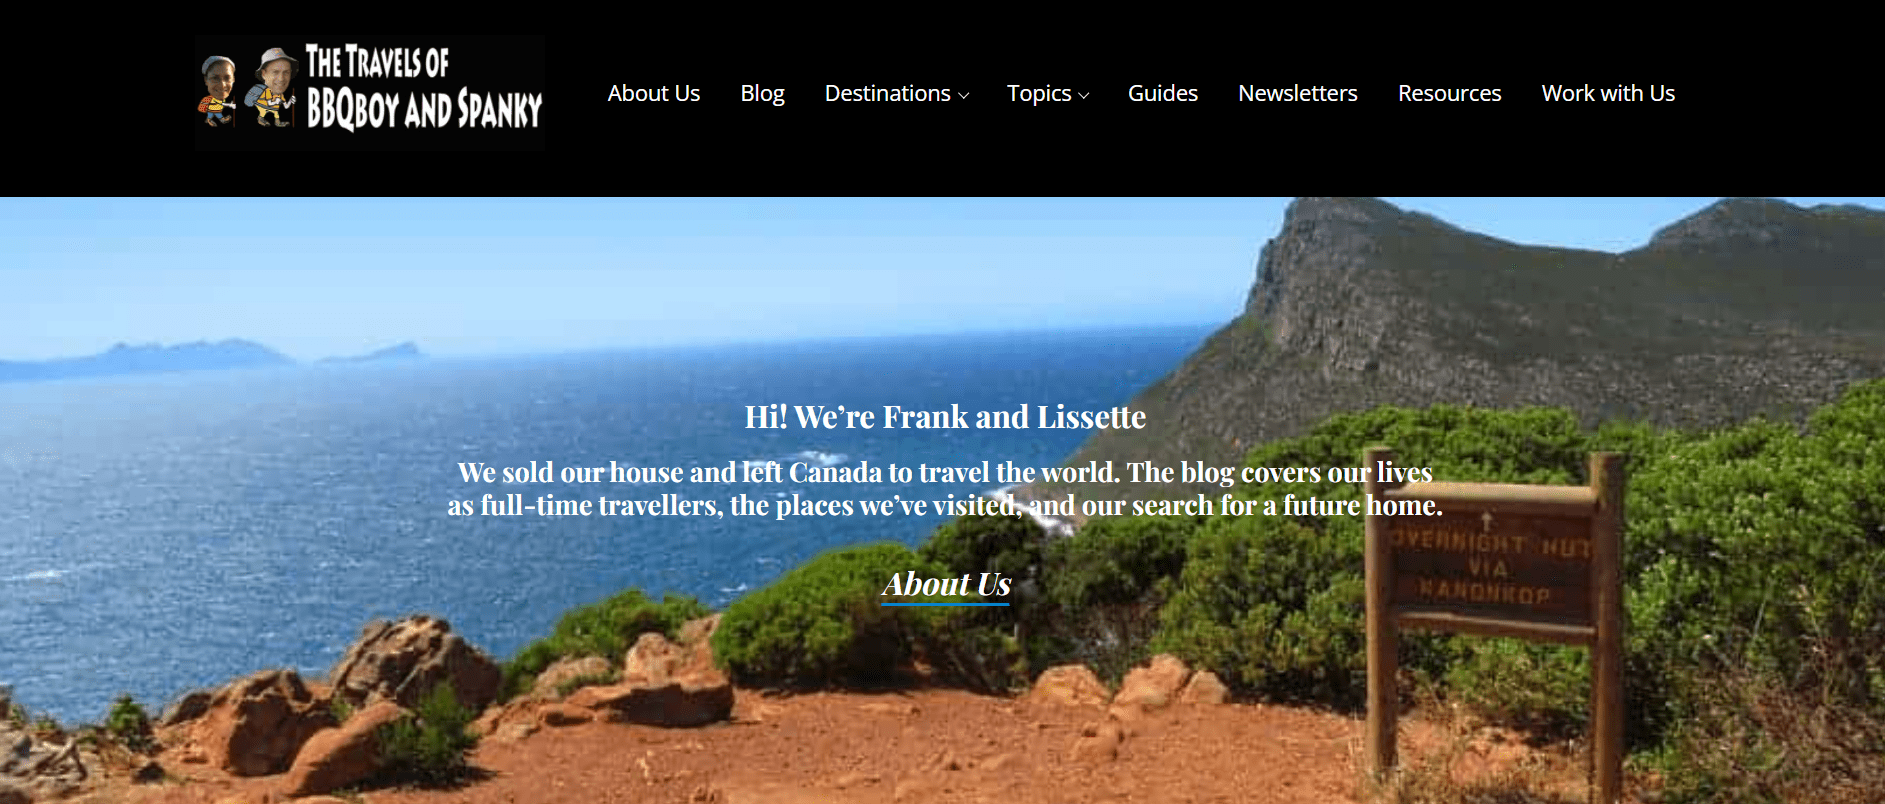 A screenshot of the homepage of the Travels of BBQ Boy and Spanky travel blog featuring a view over the sea and rocks, as well as the names of publications the blog was featured on.